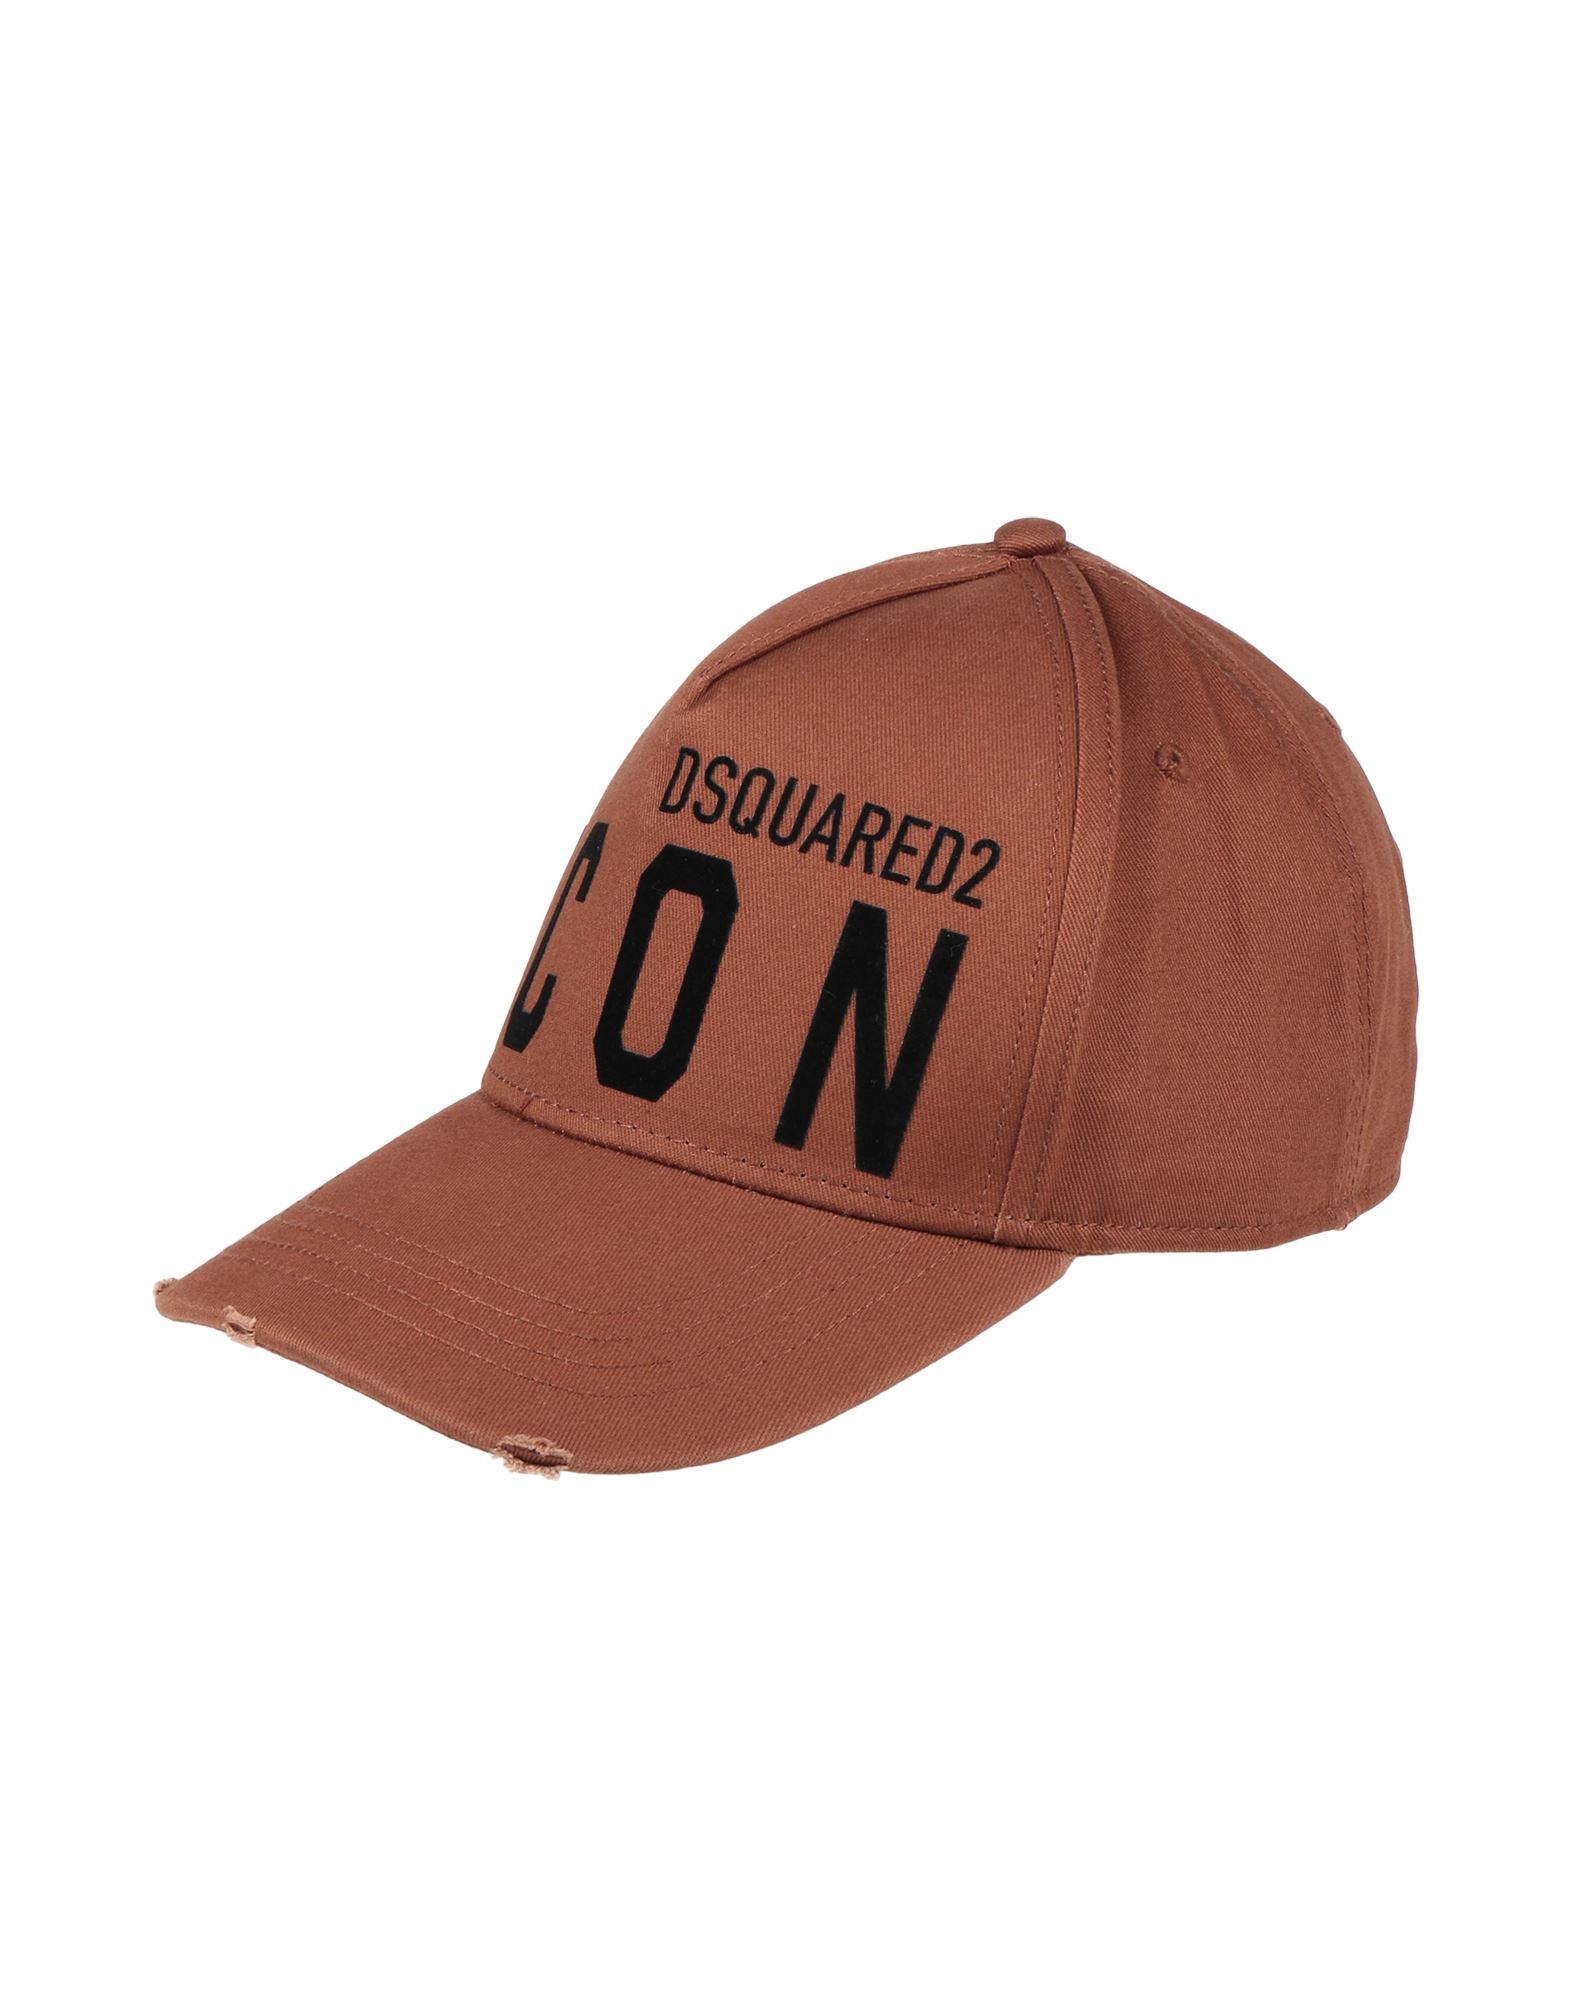 Dsquared2 Hats In Brown